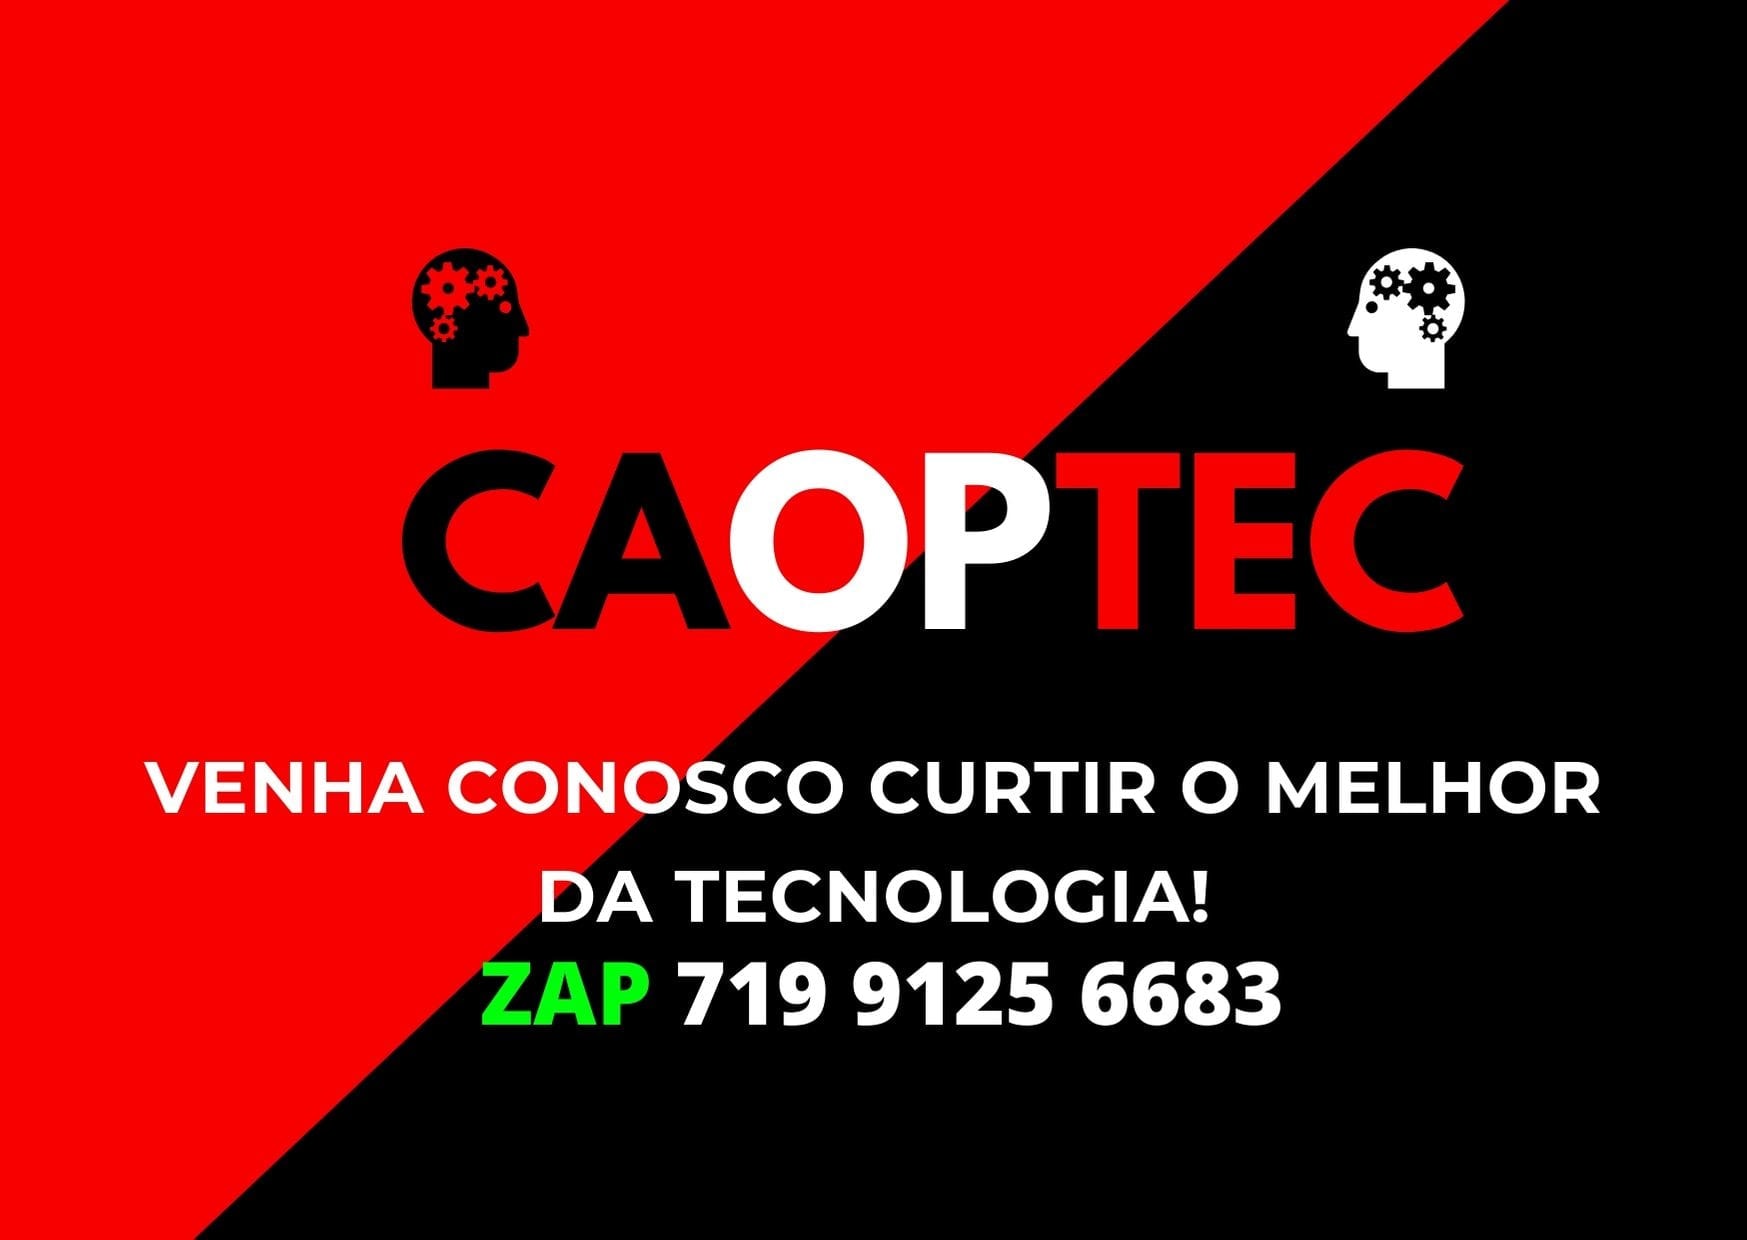 CAOPTEC